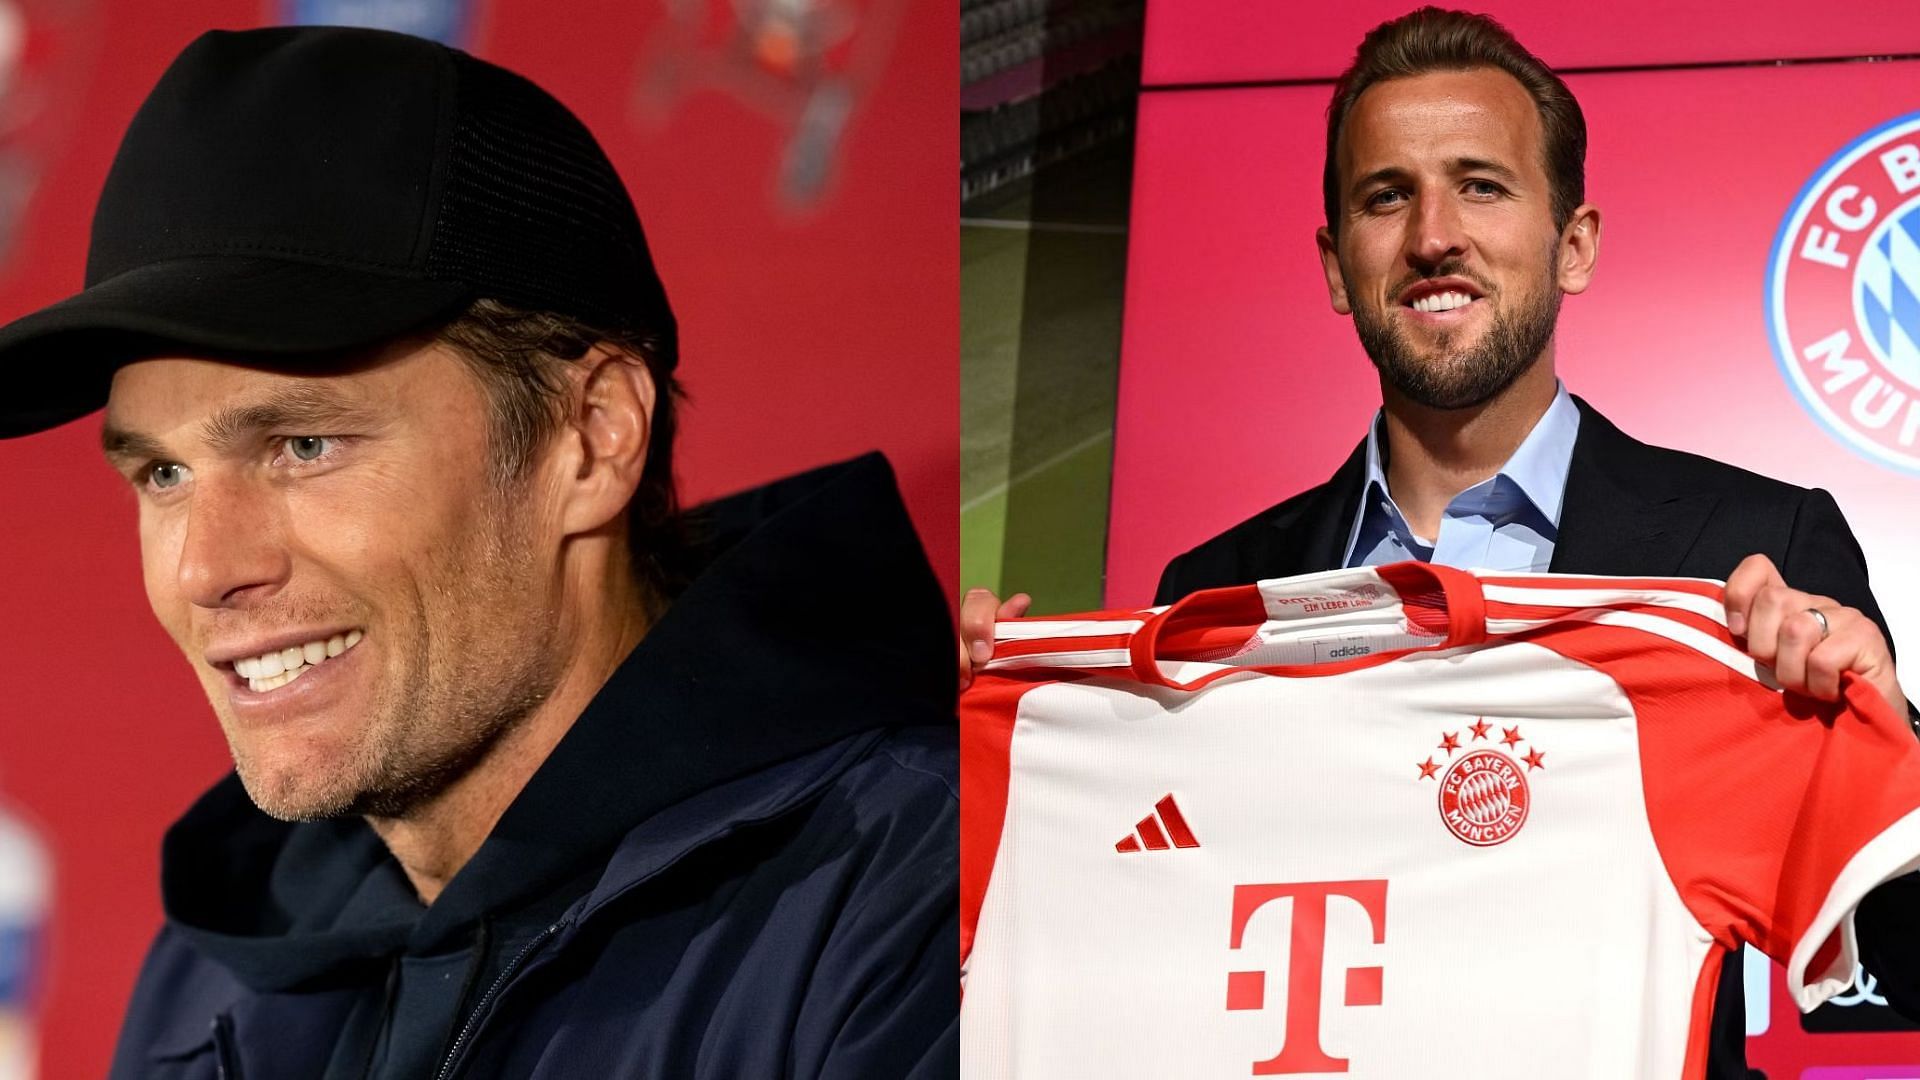 Tom Brady was supposed to meet Harry Kane after his Birmingham City FC investment. However, Kane transferred to Bayern Munich.